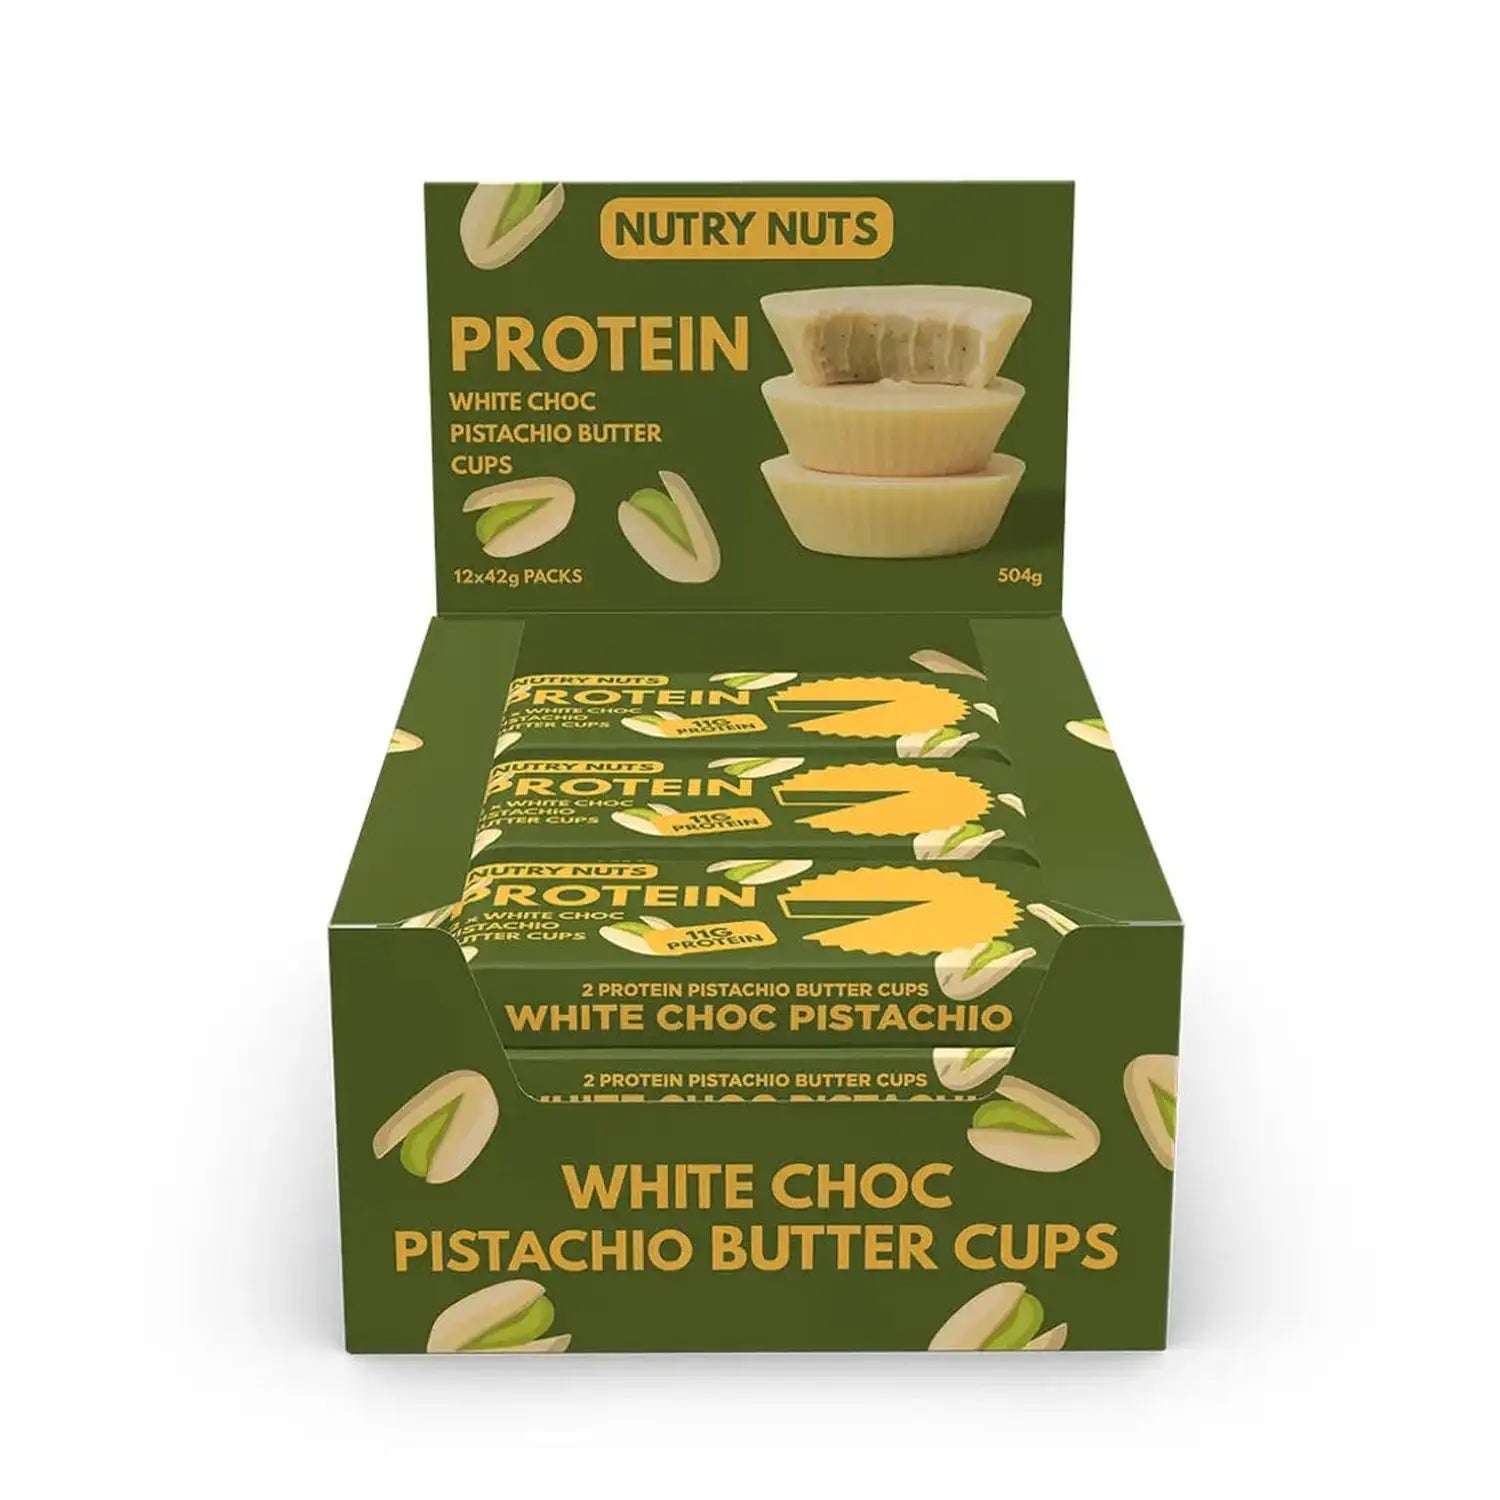 Nutry Nuts Nutry Nuts - Protein Peanut Butter Cups 12 x 42 g White Choc Pistachio kaufen bei HighPowered.ch